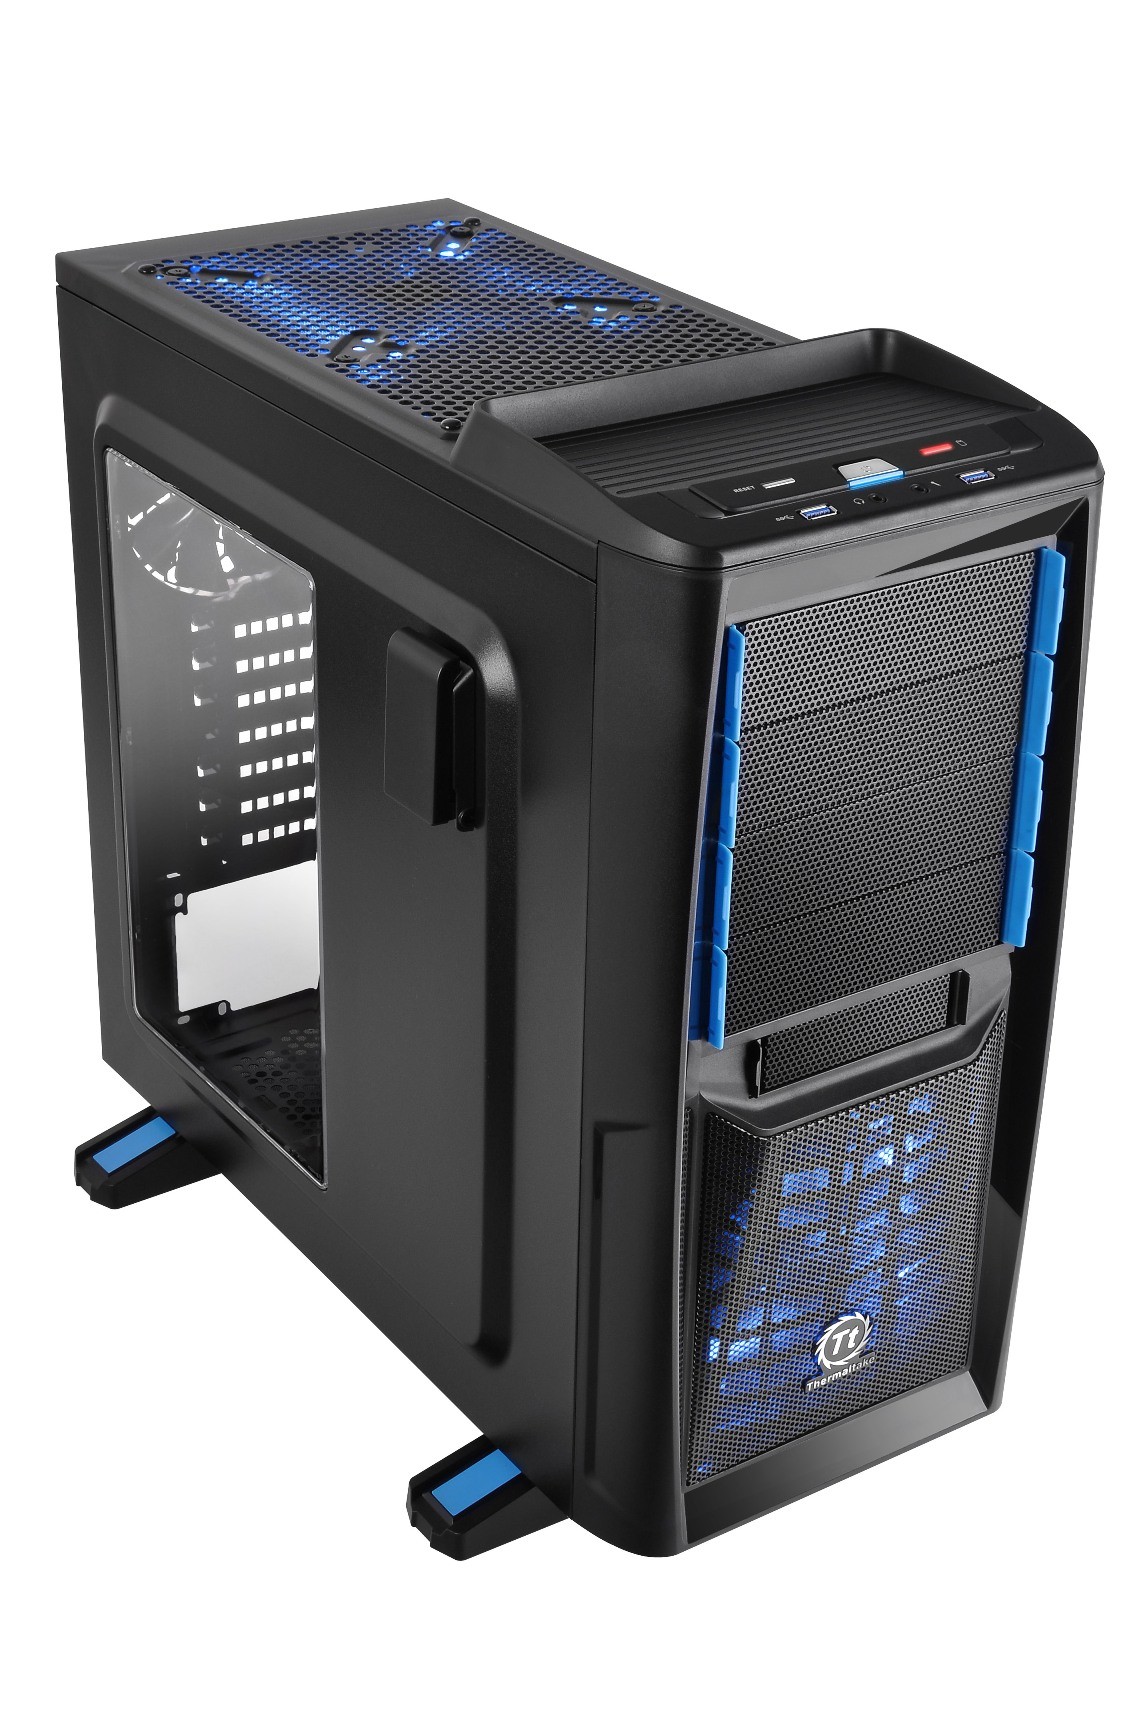 Media asset in full size related to 3dfxzone.it news item entitled as follows: Thermaltake annuncia il case gaming-oriented Chaser A41 | Image Name: news19016_Thermaltake-Chaser-A41_case_3.jpg